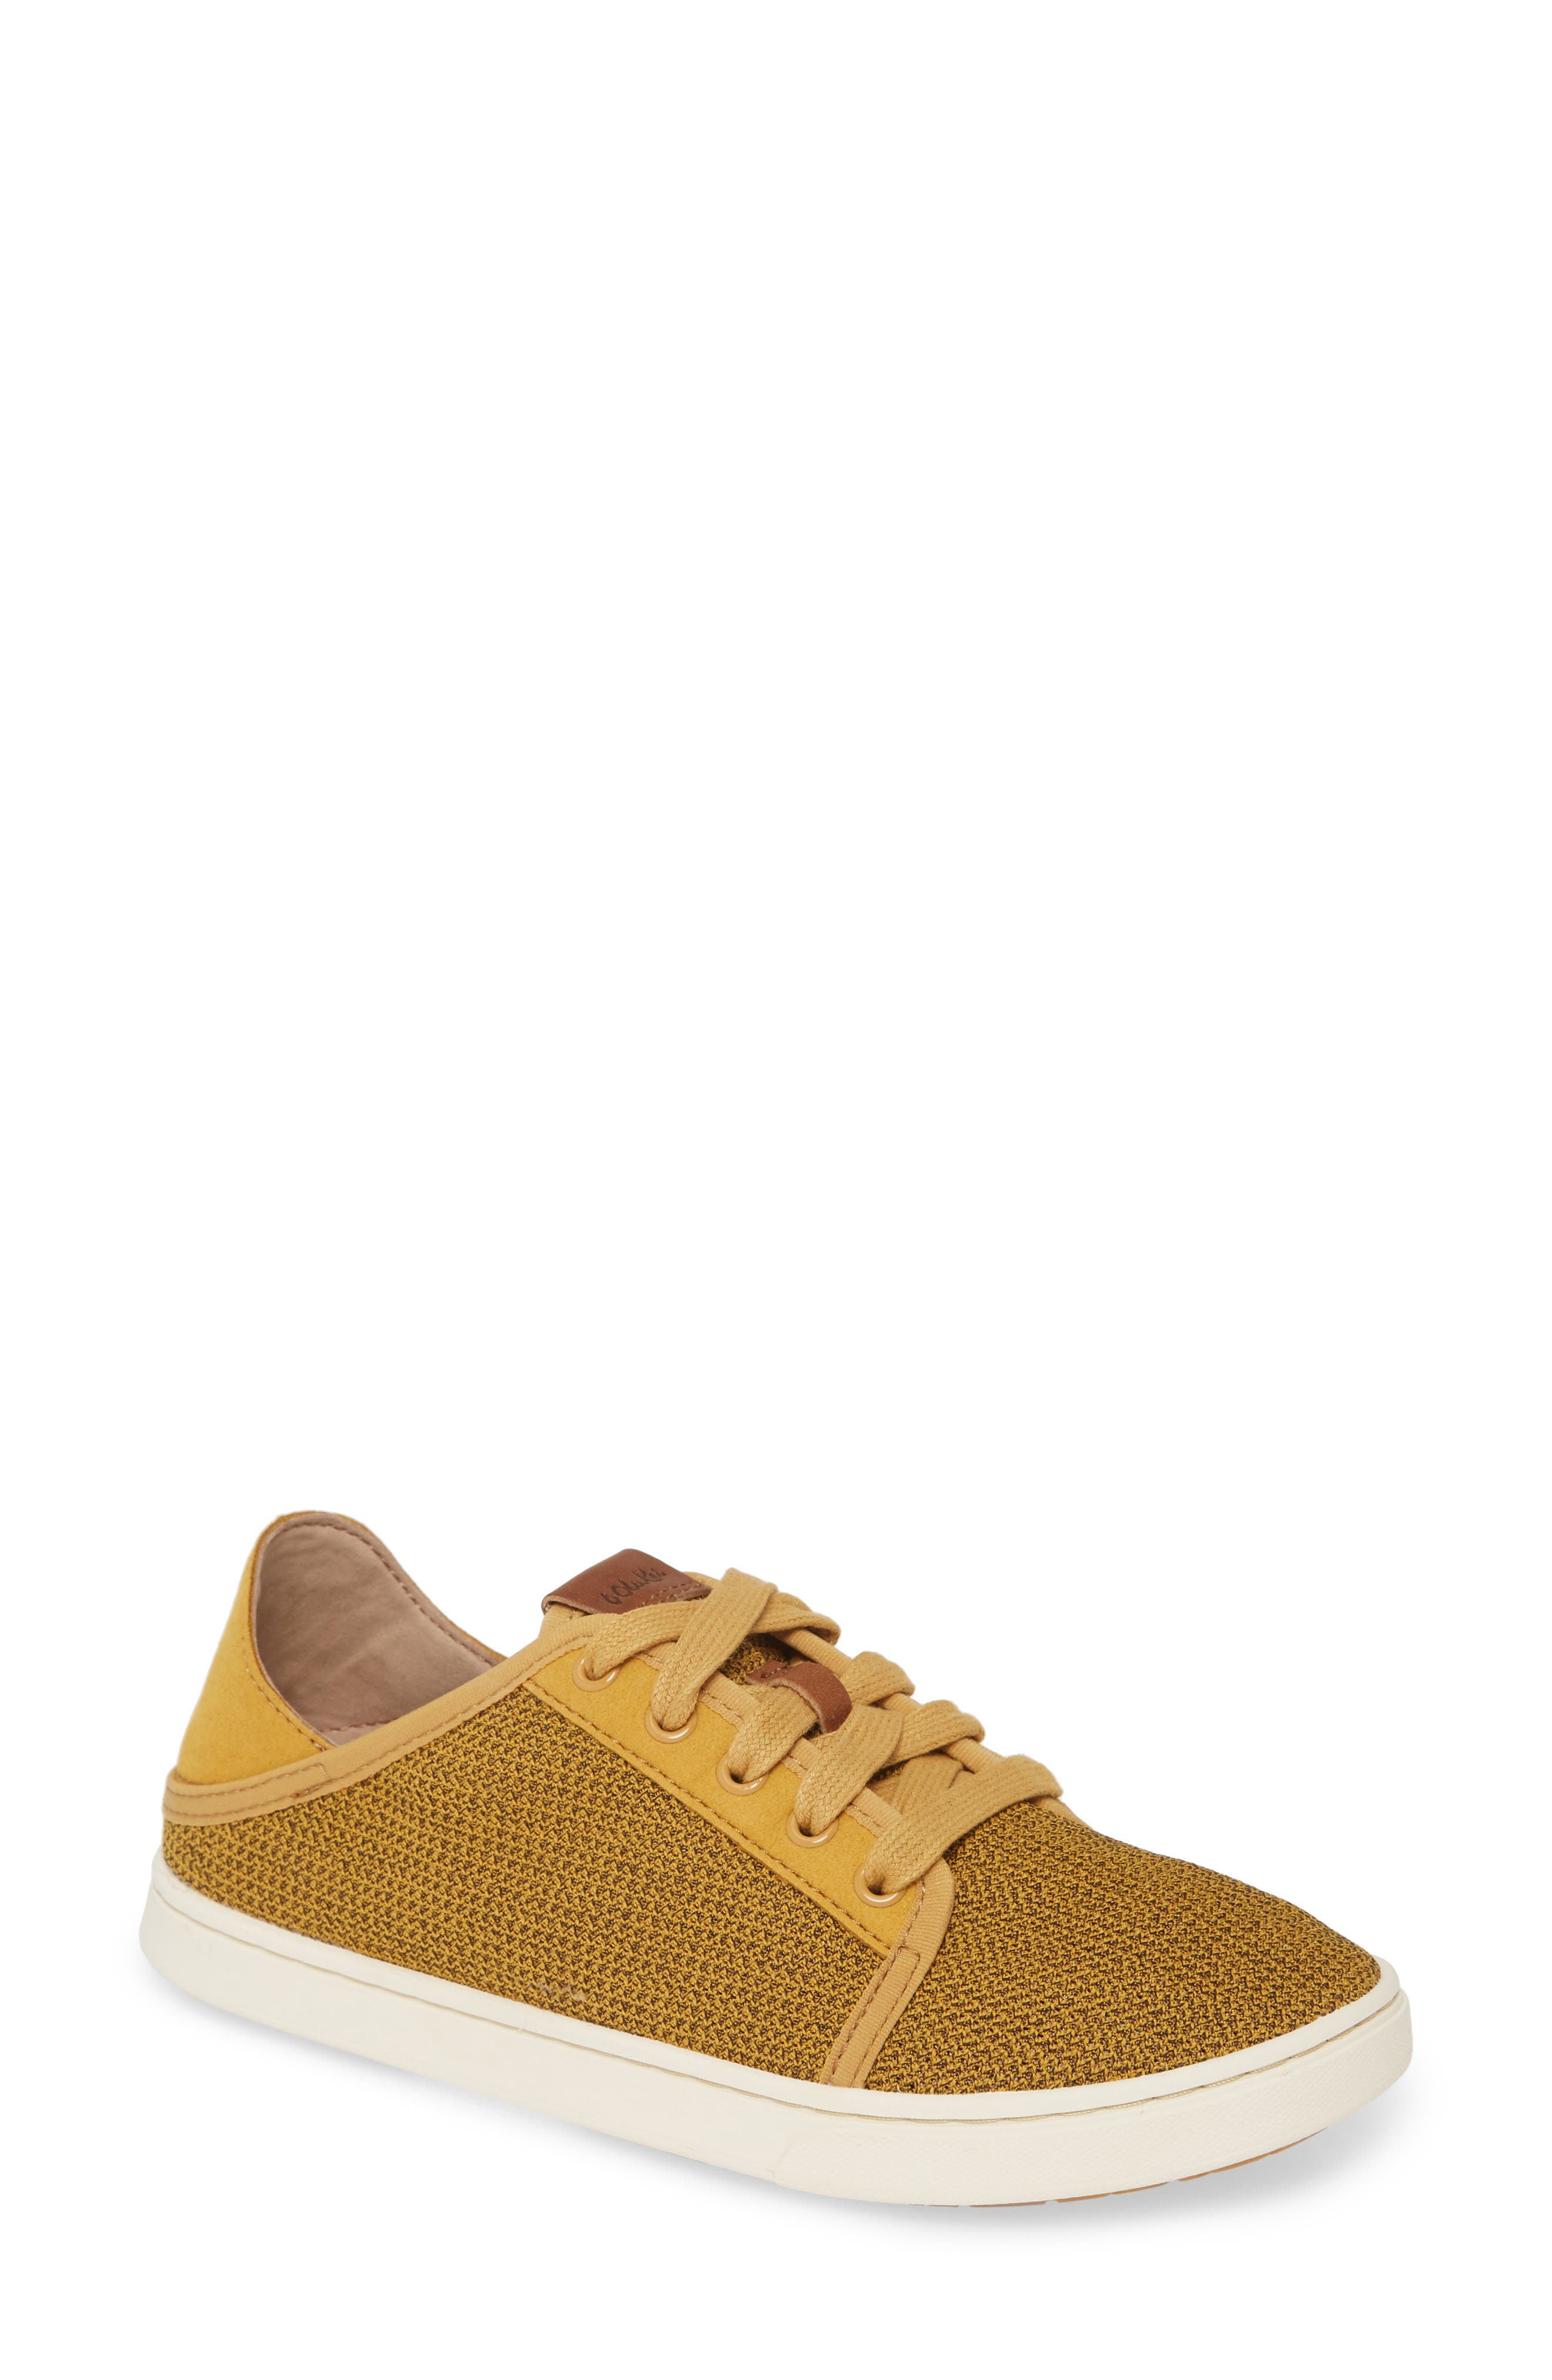 mustard colored women's shoes